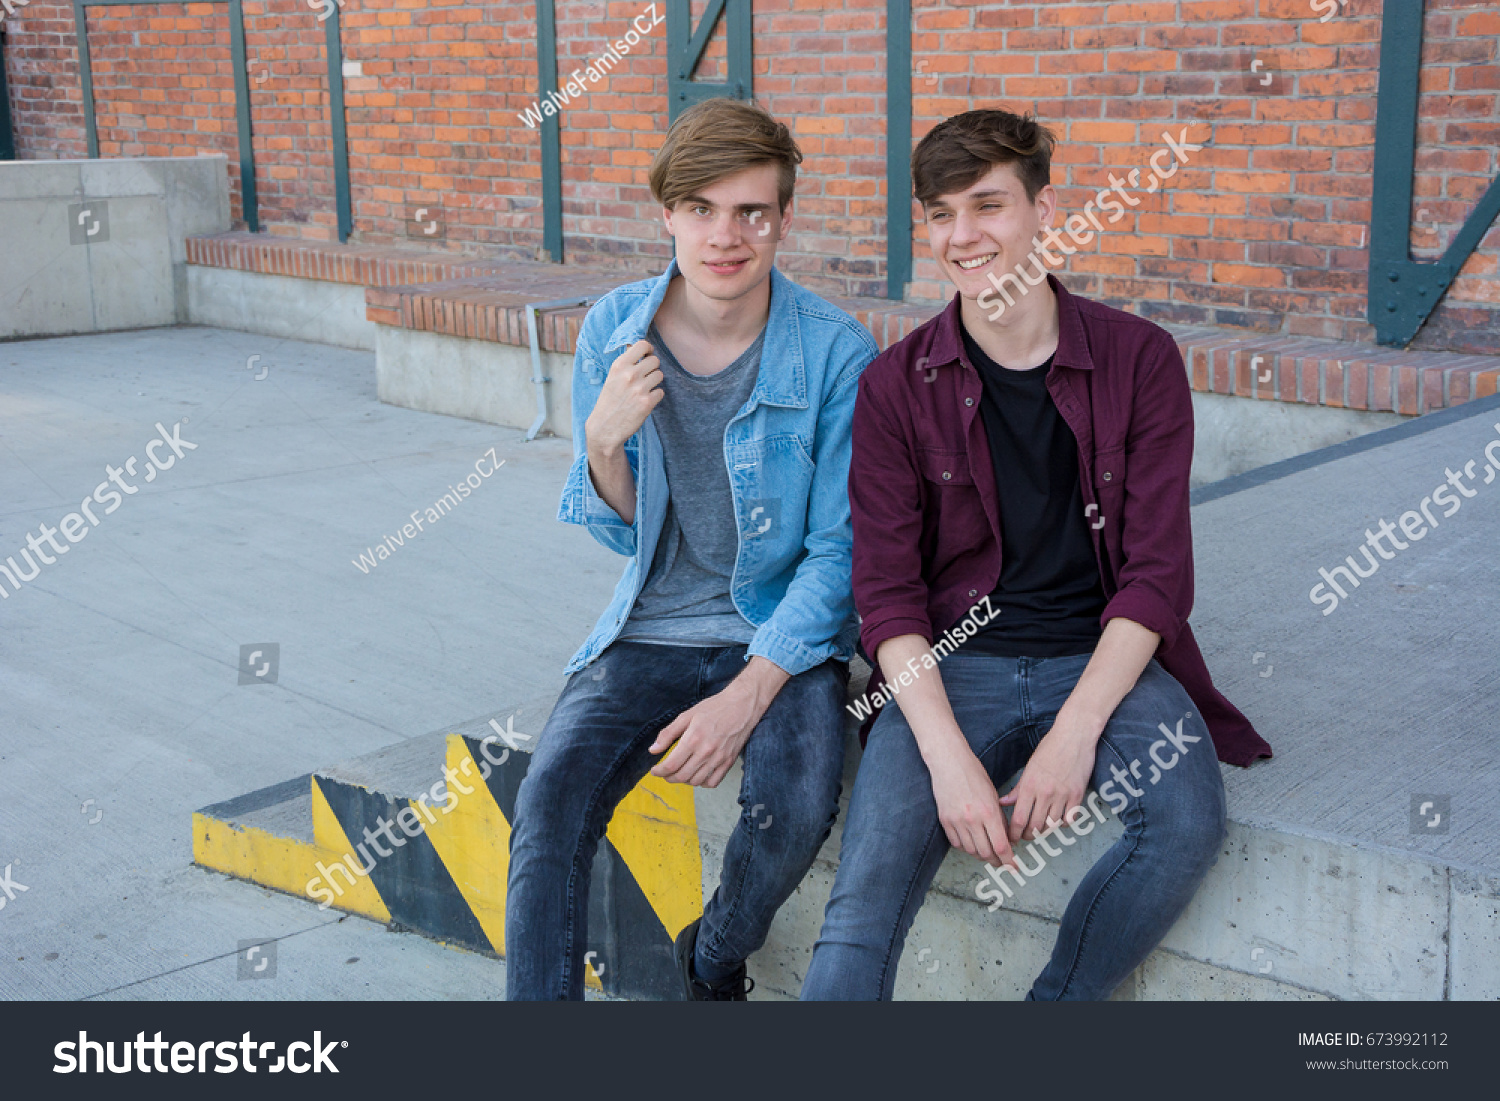 Two teenage boys brothers sitting on stairs at street talking and having fun, #673992112